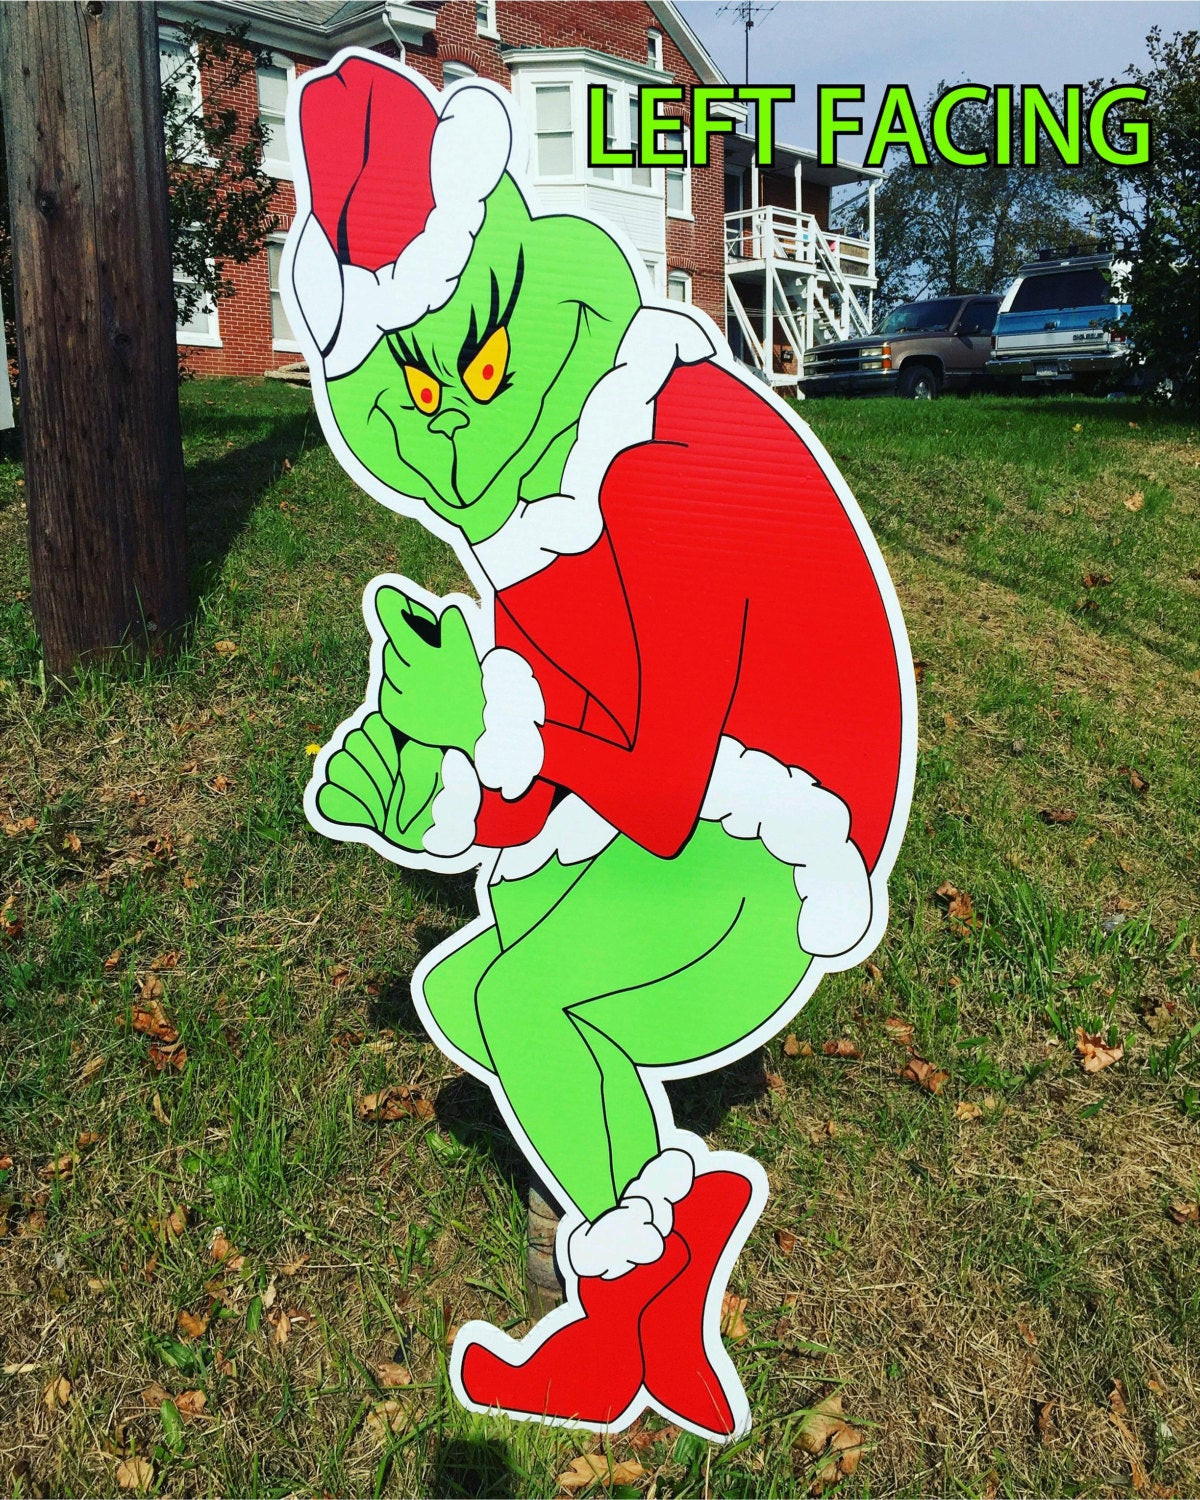 Grinch Christmas Lights Outdoor
 Grinch Stealing Christmas Lights Yard by BunsBodatiousCreates